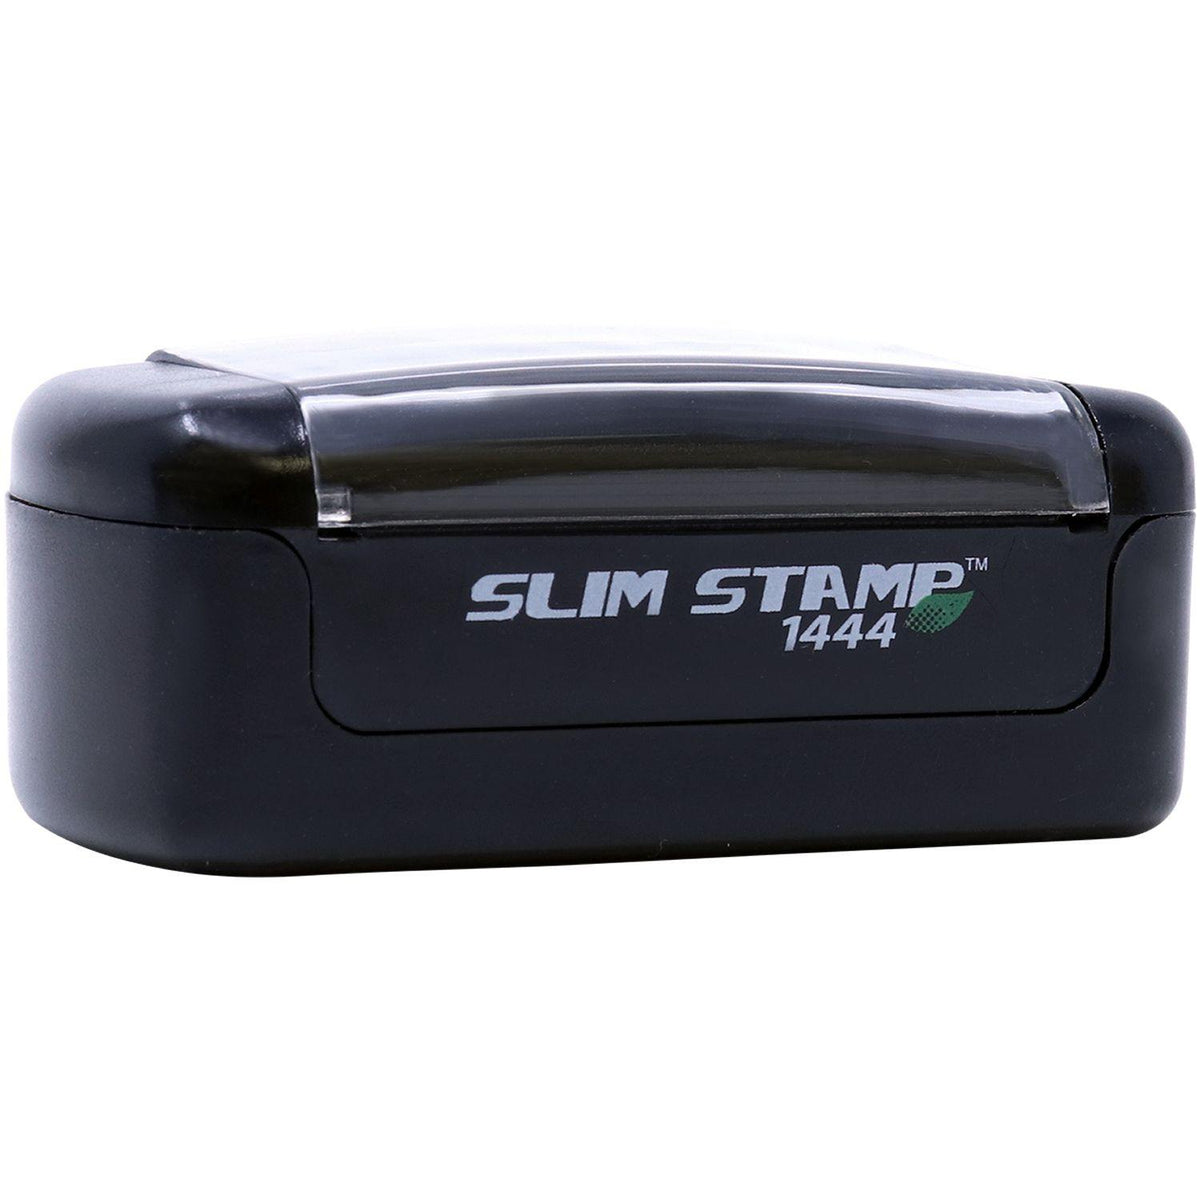 Slim Pre Inked Blue Cross Stamp - Engineer Seal Stamps - Brand_Slim, Impression Size_Small, Stamp Type_Pre-Inked Stamp, Type of Use_Medical Office